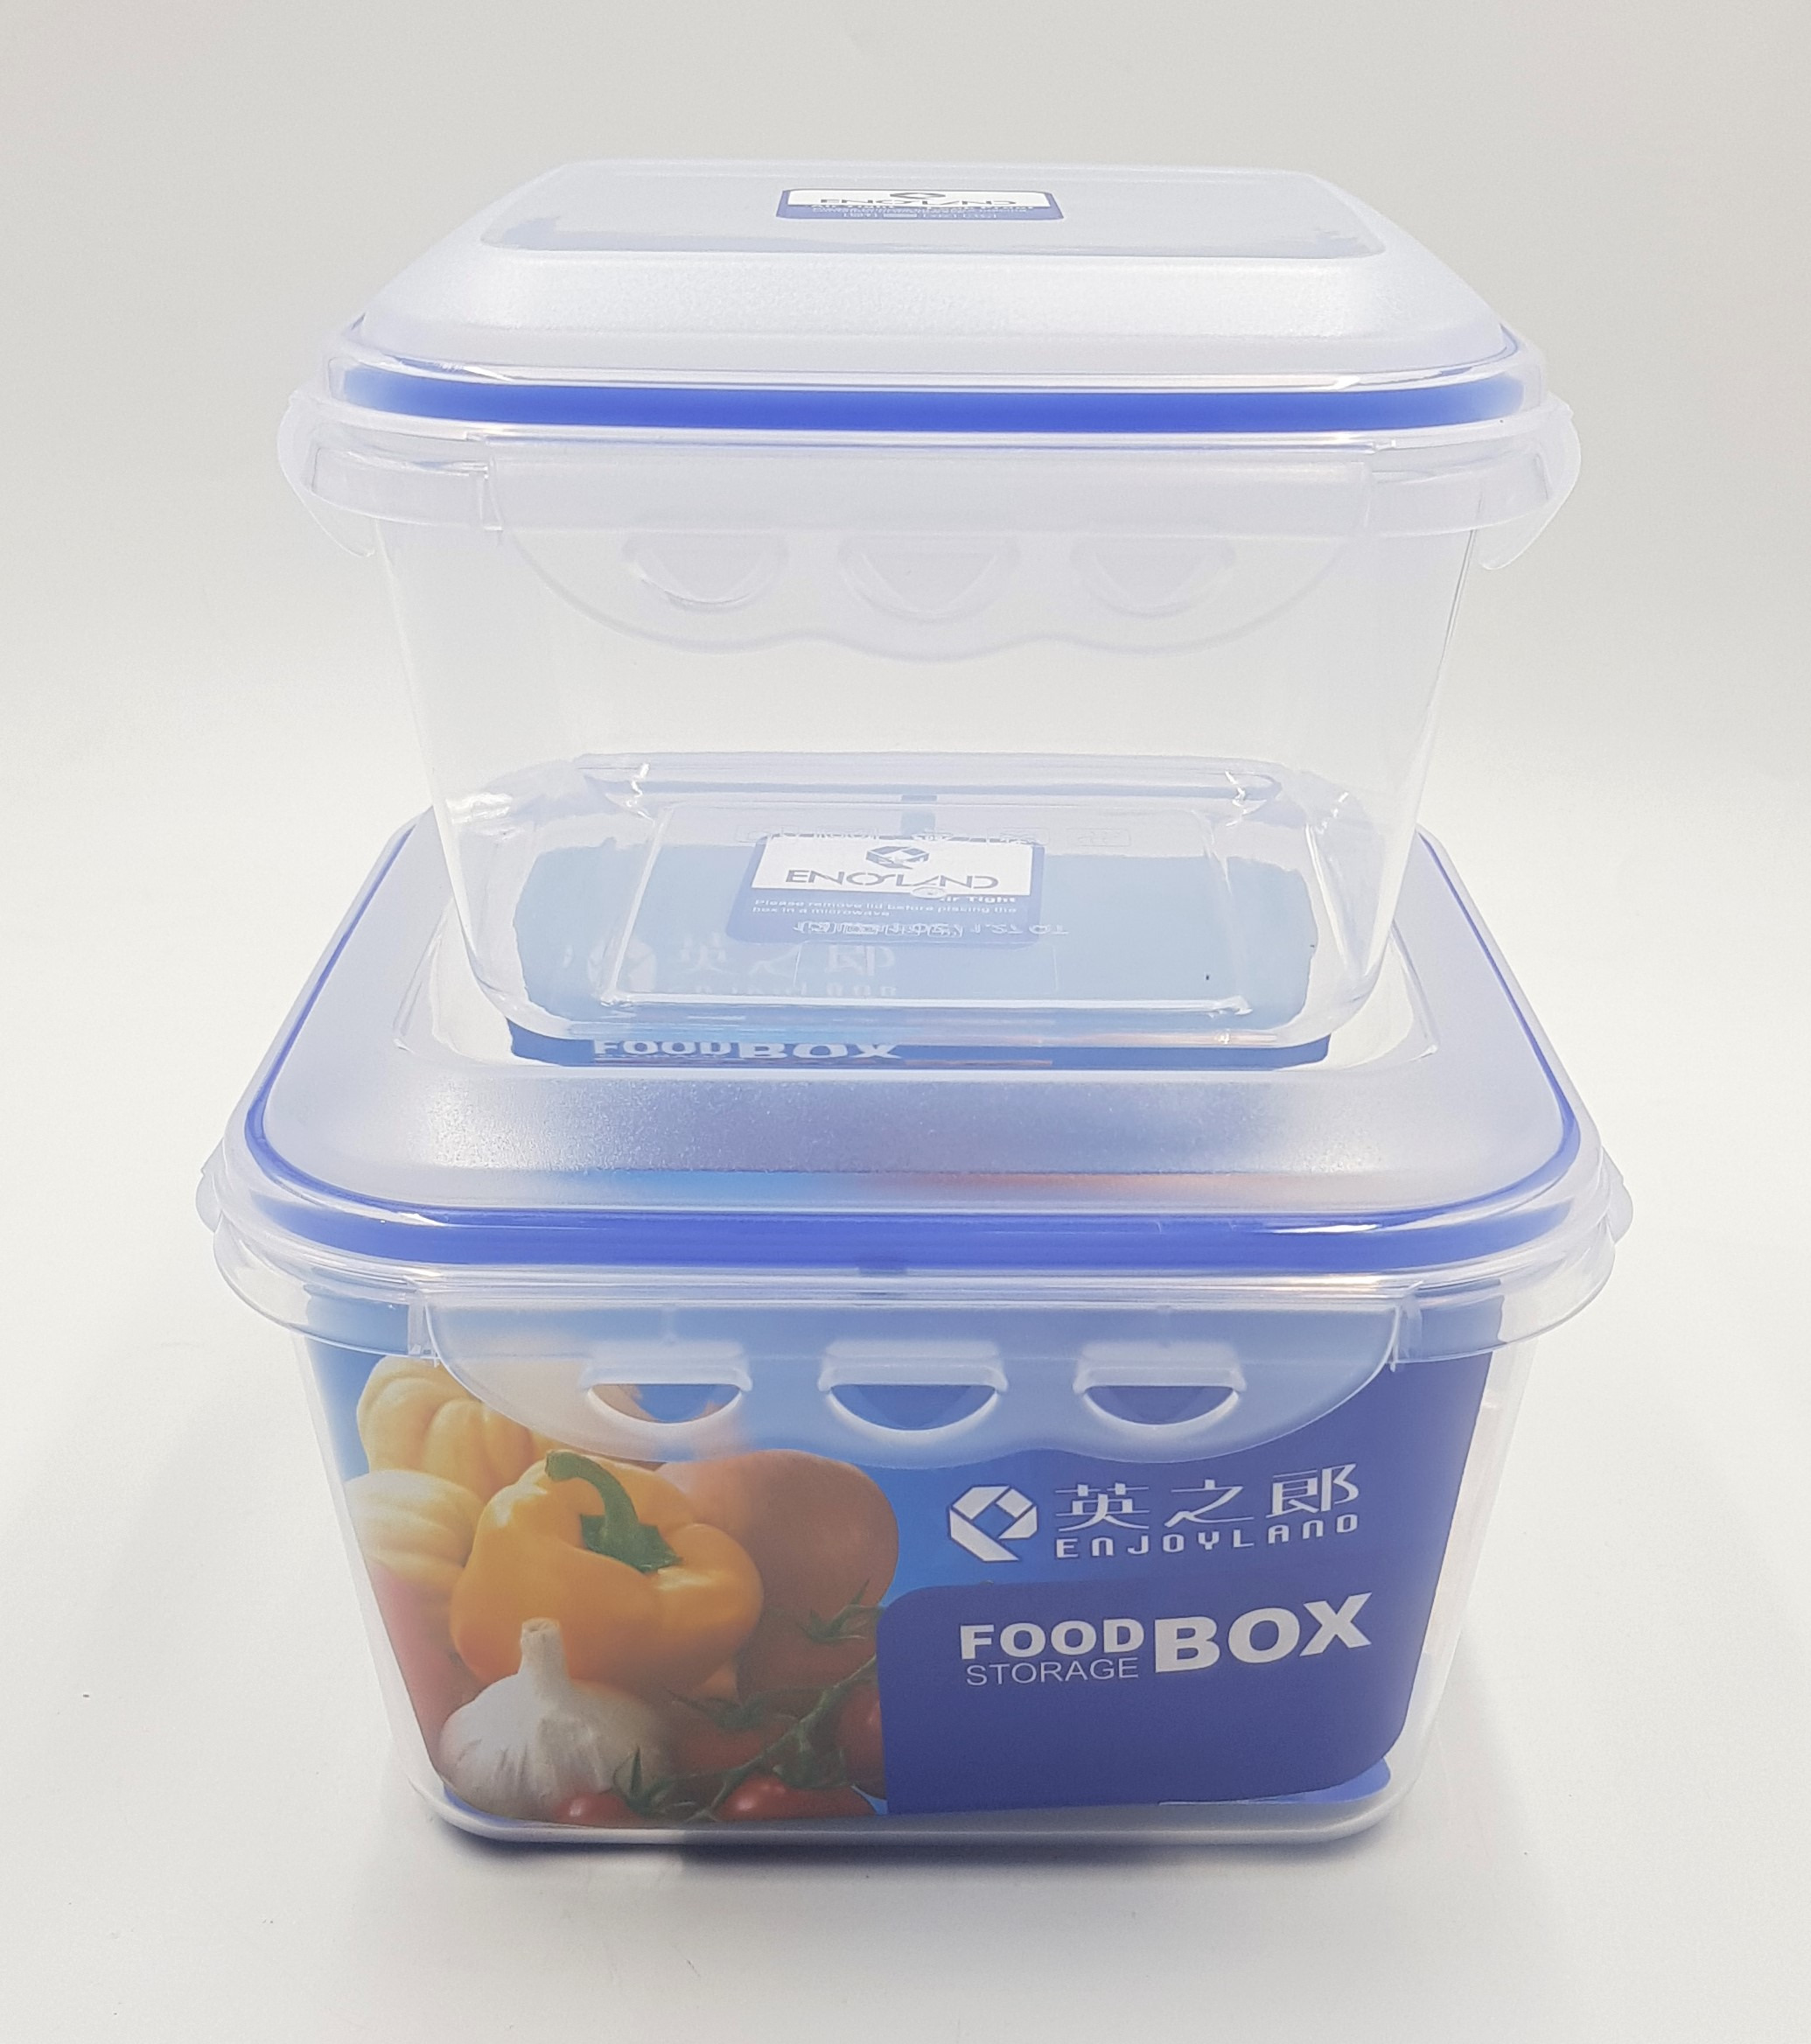 Belle Vous Clear Reusable Plastic Food Containers with 2 Compartments and Lid (3Pack) - Leak-proof, BPA Free Storage Containers - Microwave, Freezer & Dishwasher Resistant - Meal Prep Lunchboxes